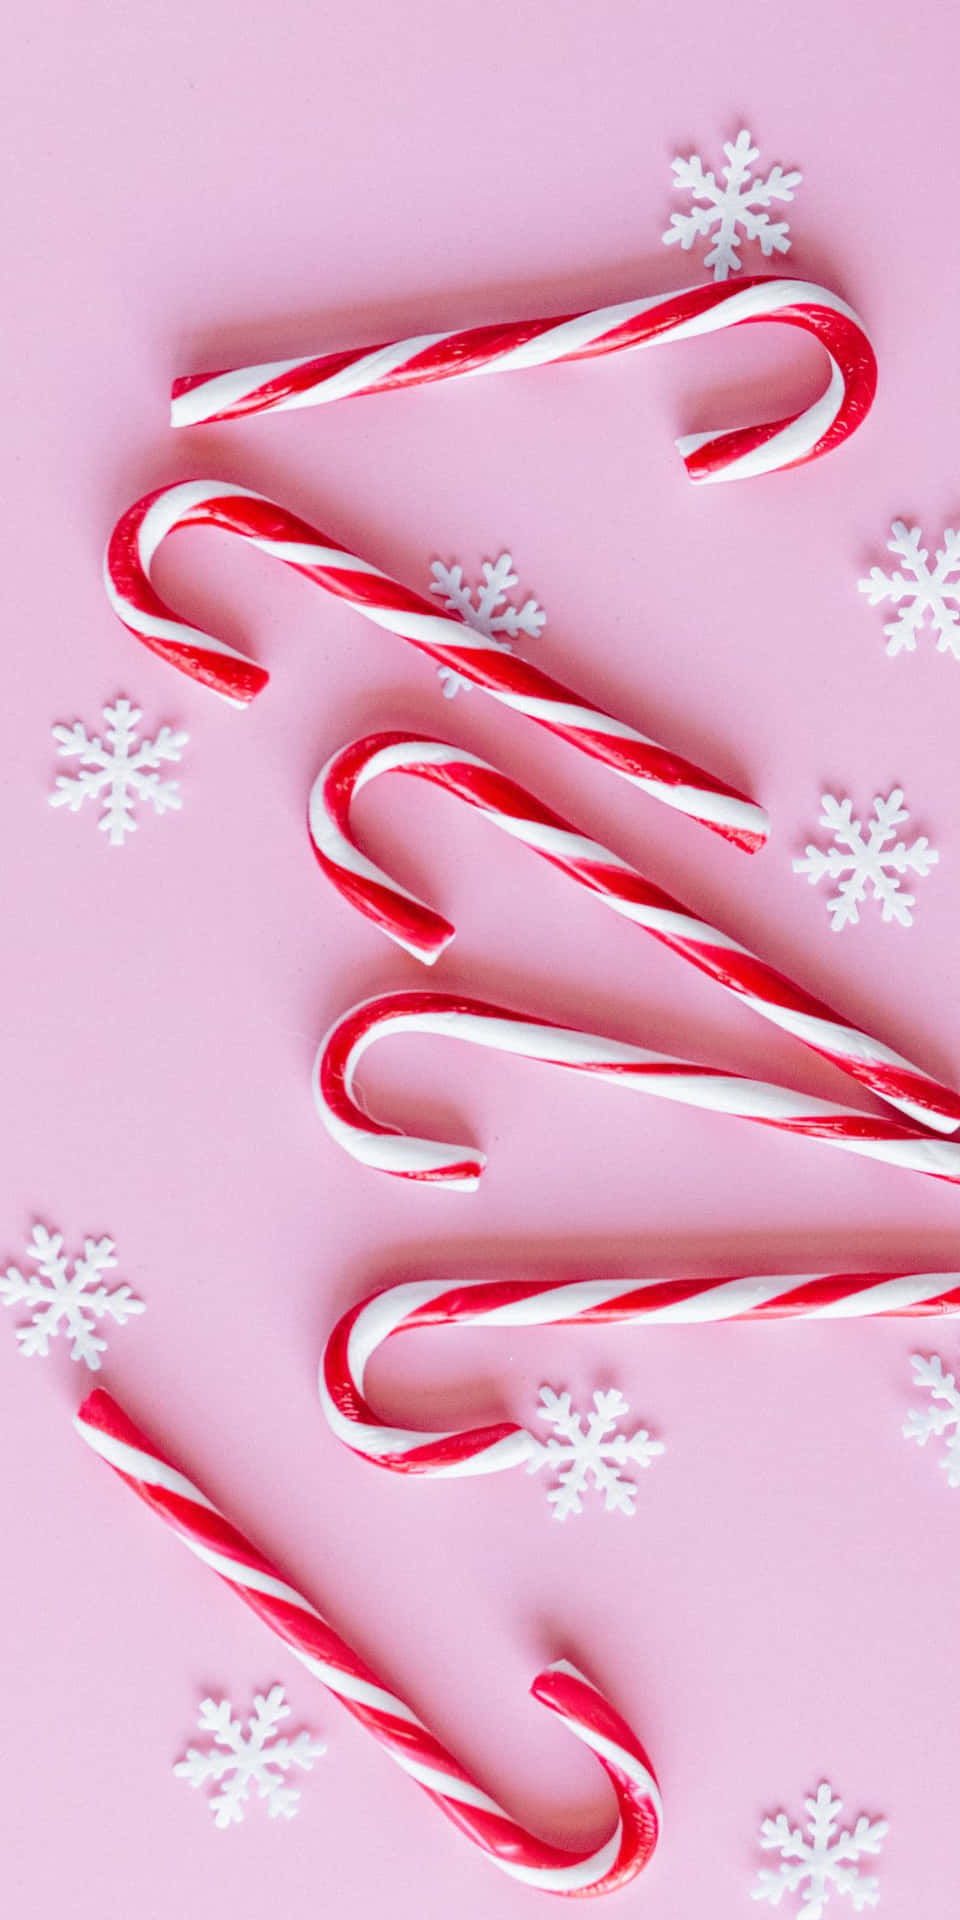 Show your festive spirit with a beautiful pink Christmas background